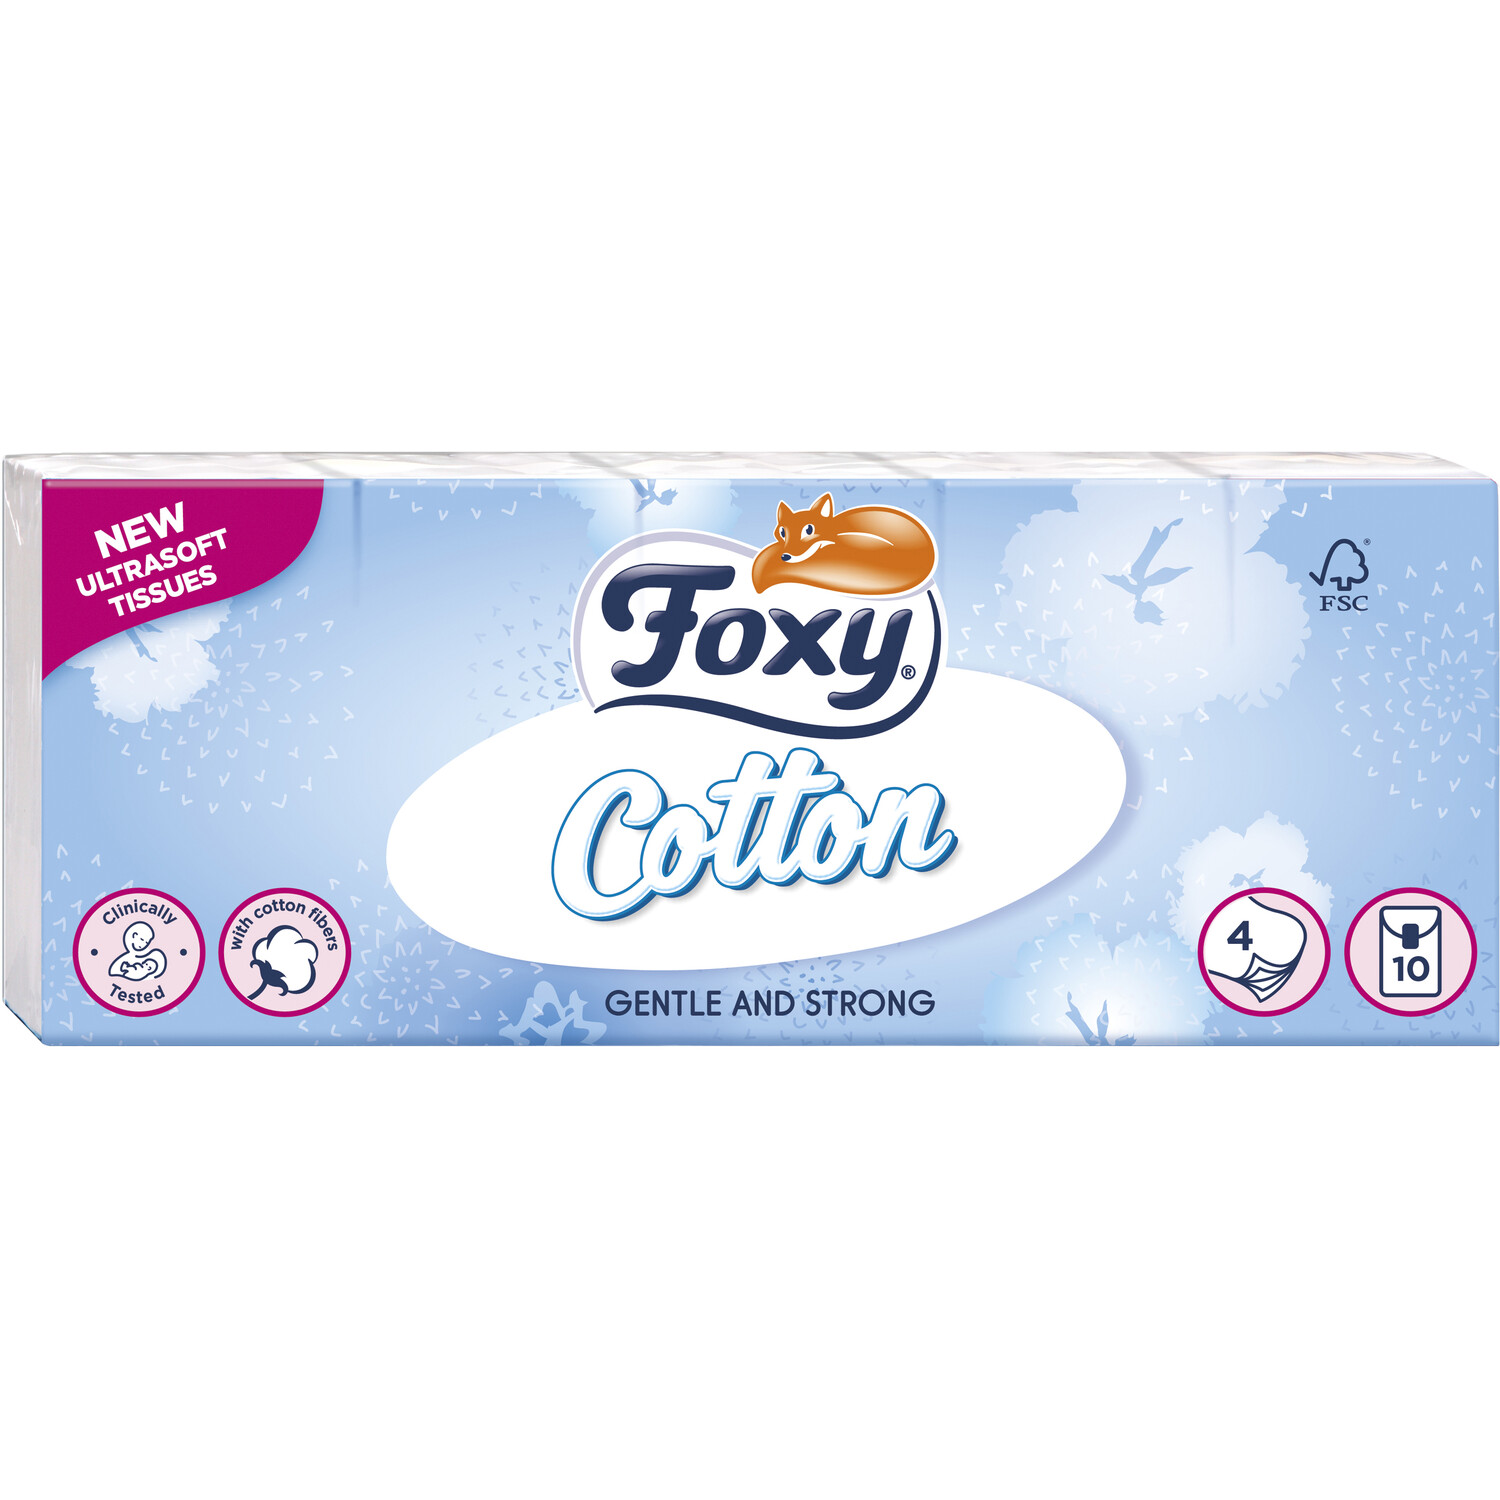 Pack of 10 Foxy Cotton Pocket Tissues - White Image